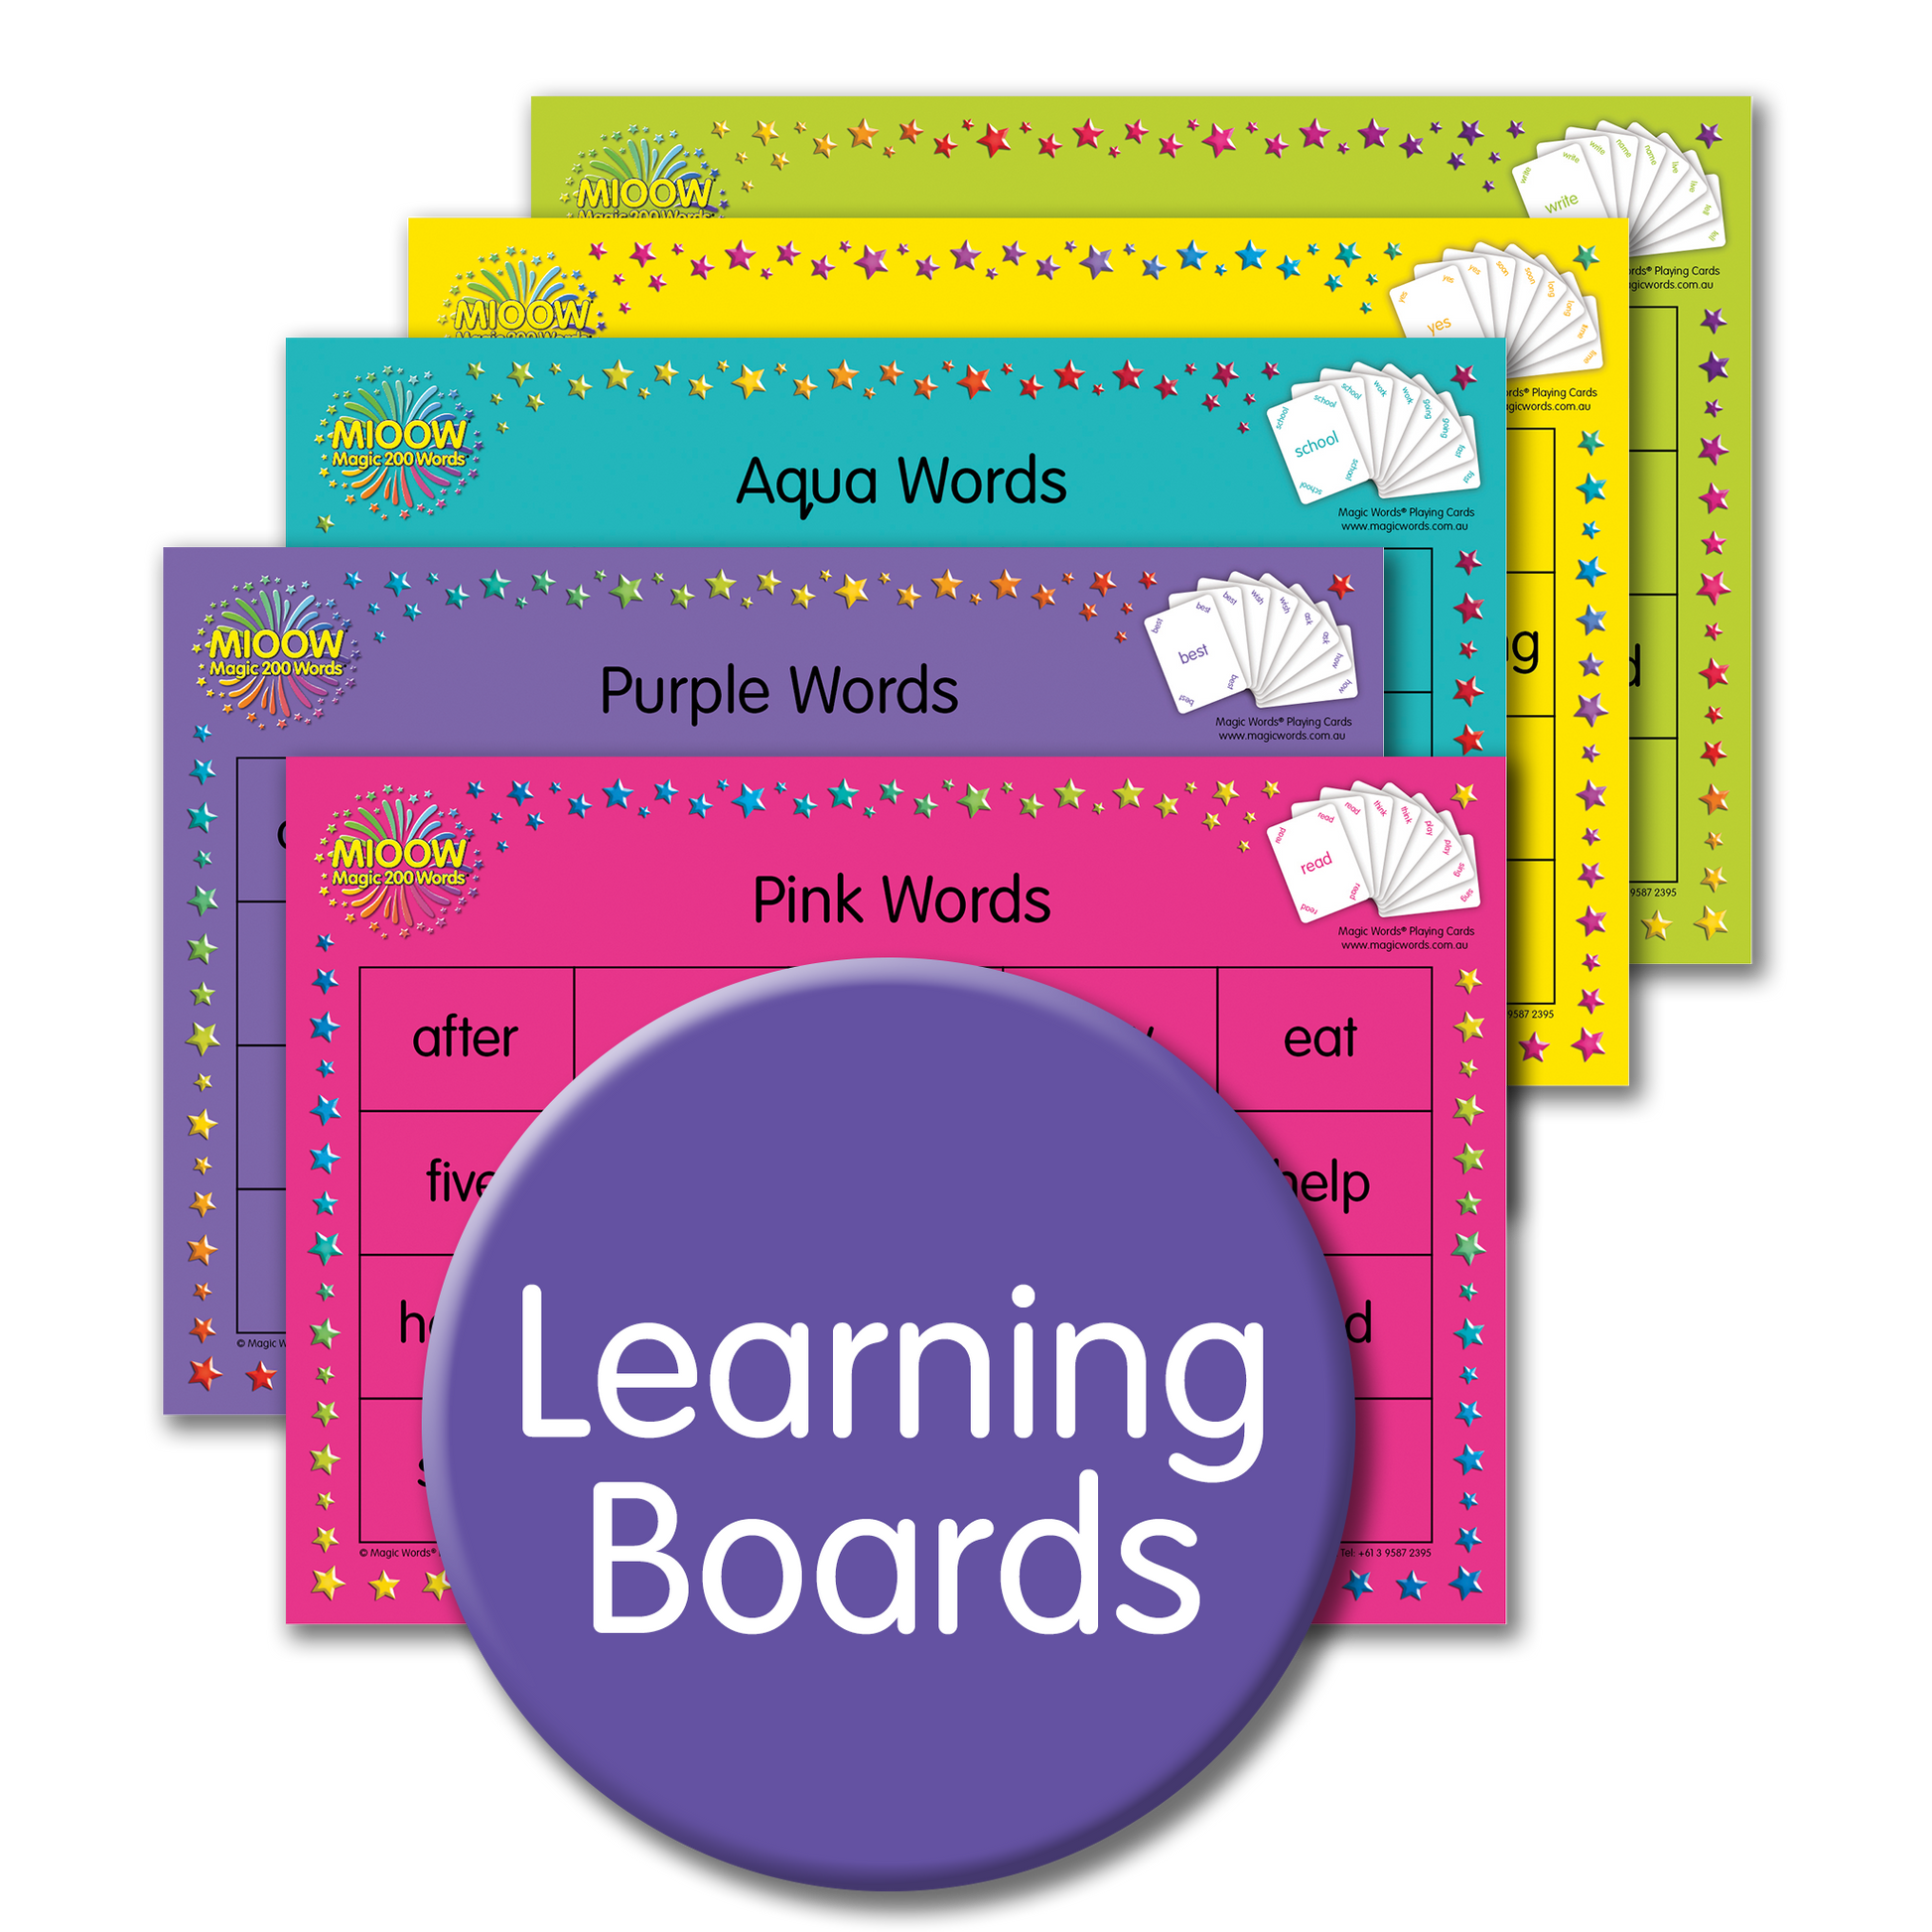 Magic Words sight words Learning Boards for learning to read the most frequently used words in reading. featuring the Magic 200 Words Learning Boards x 5 levels.